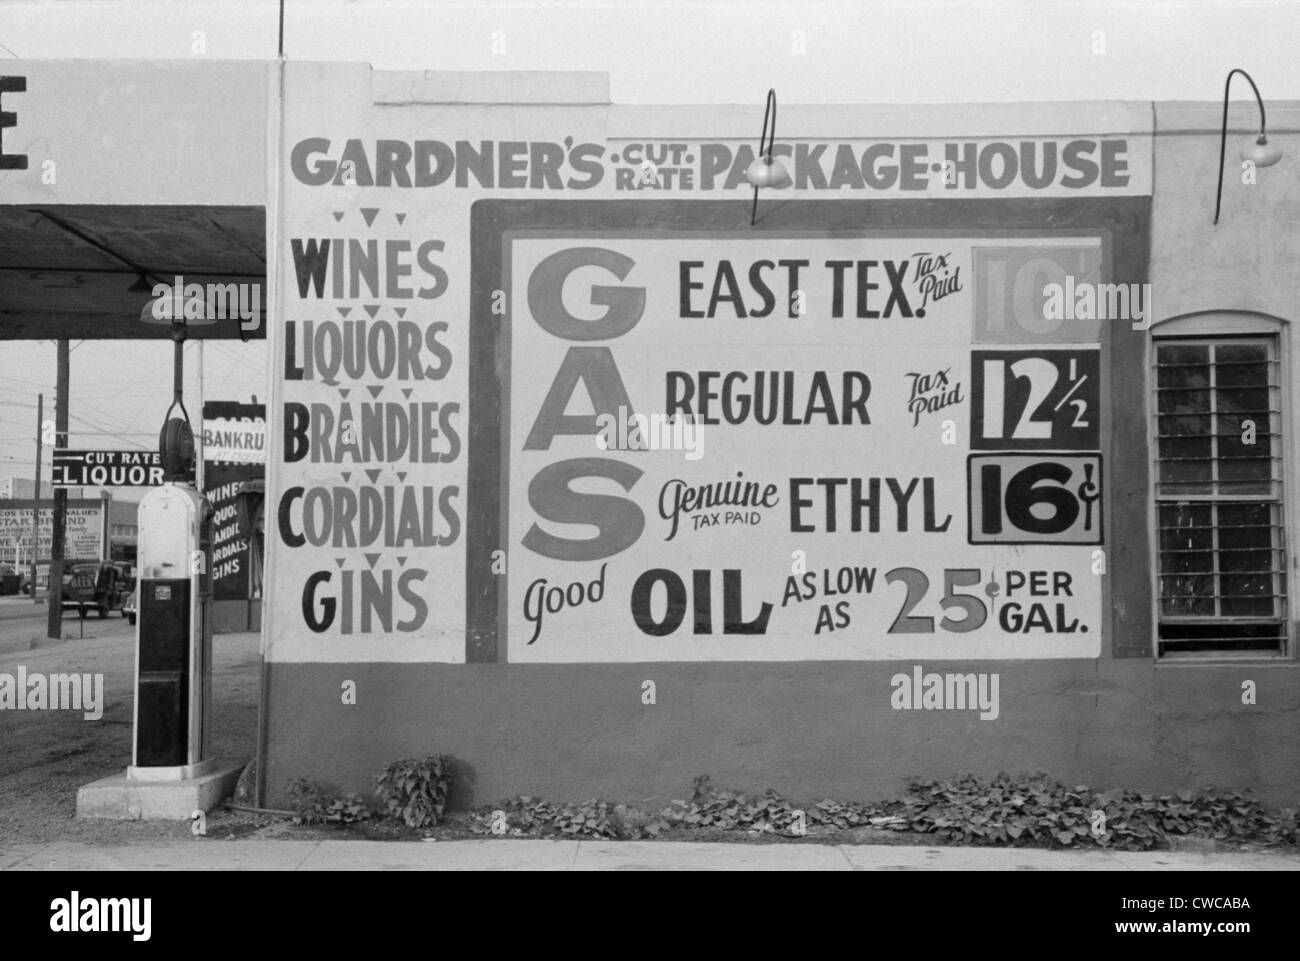 Gardener's Cut Rate Package House sign advertising alcoholic beverages and gasoline prices. Waco, Texas, Nov. 1939. Stock Photo